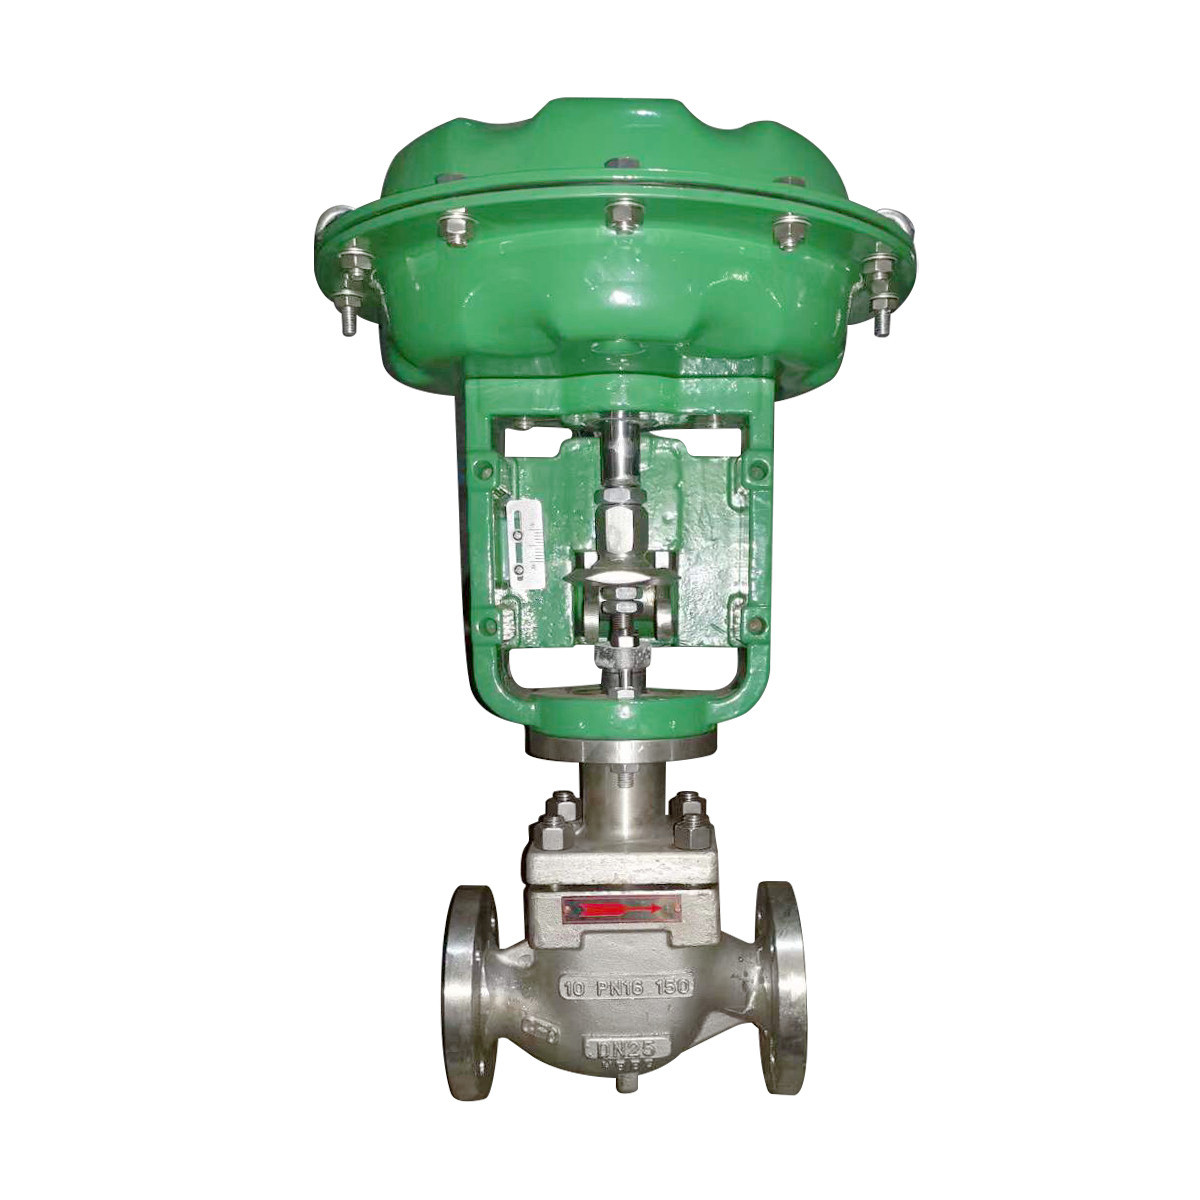 Top guided control valve